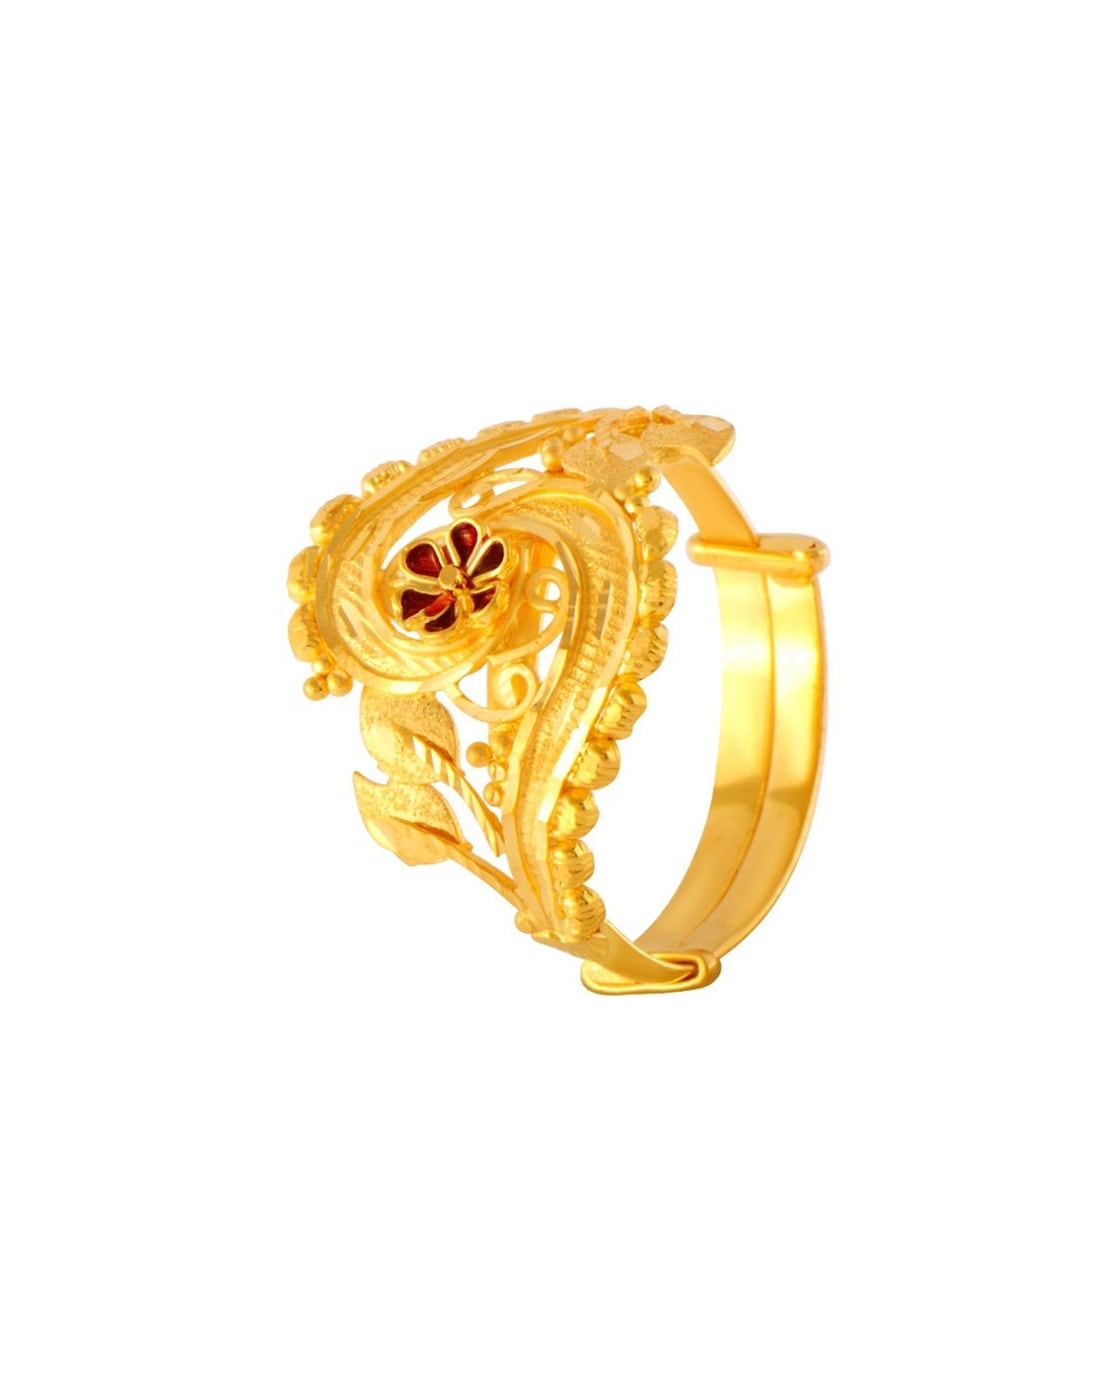 Wonderful 14k Gold Thumb Ring Heart Design | Designer Ring from PC Chandra  Collection